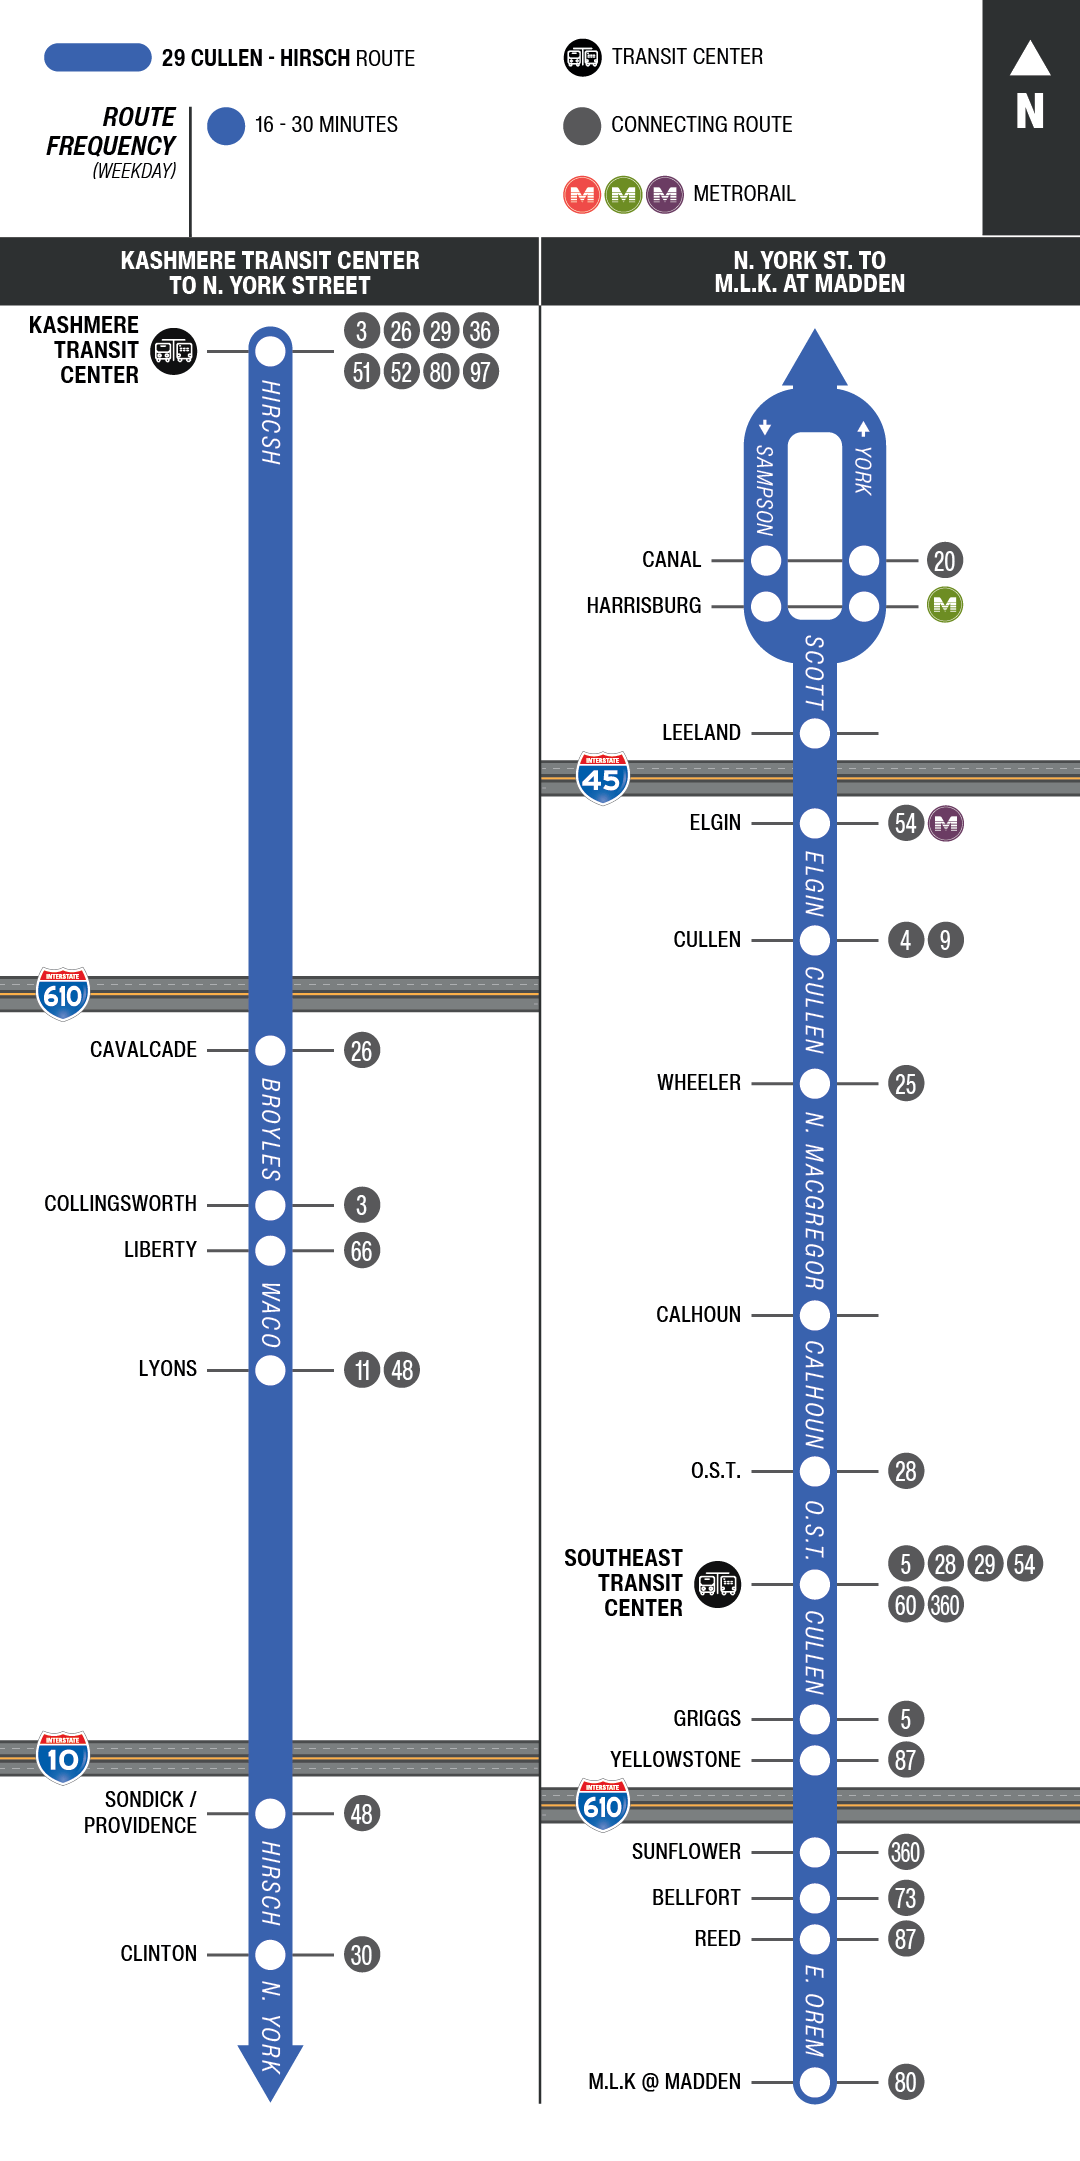 Route map for 29 Cullen / Hirsch bus